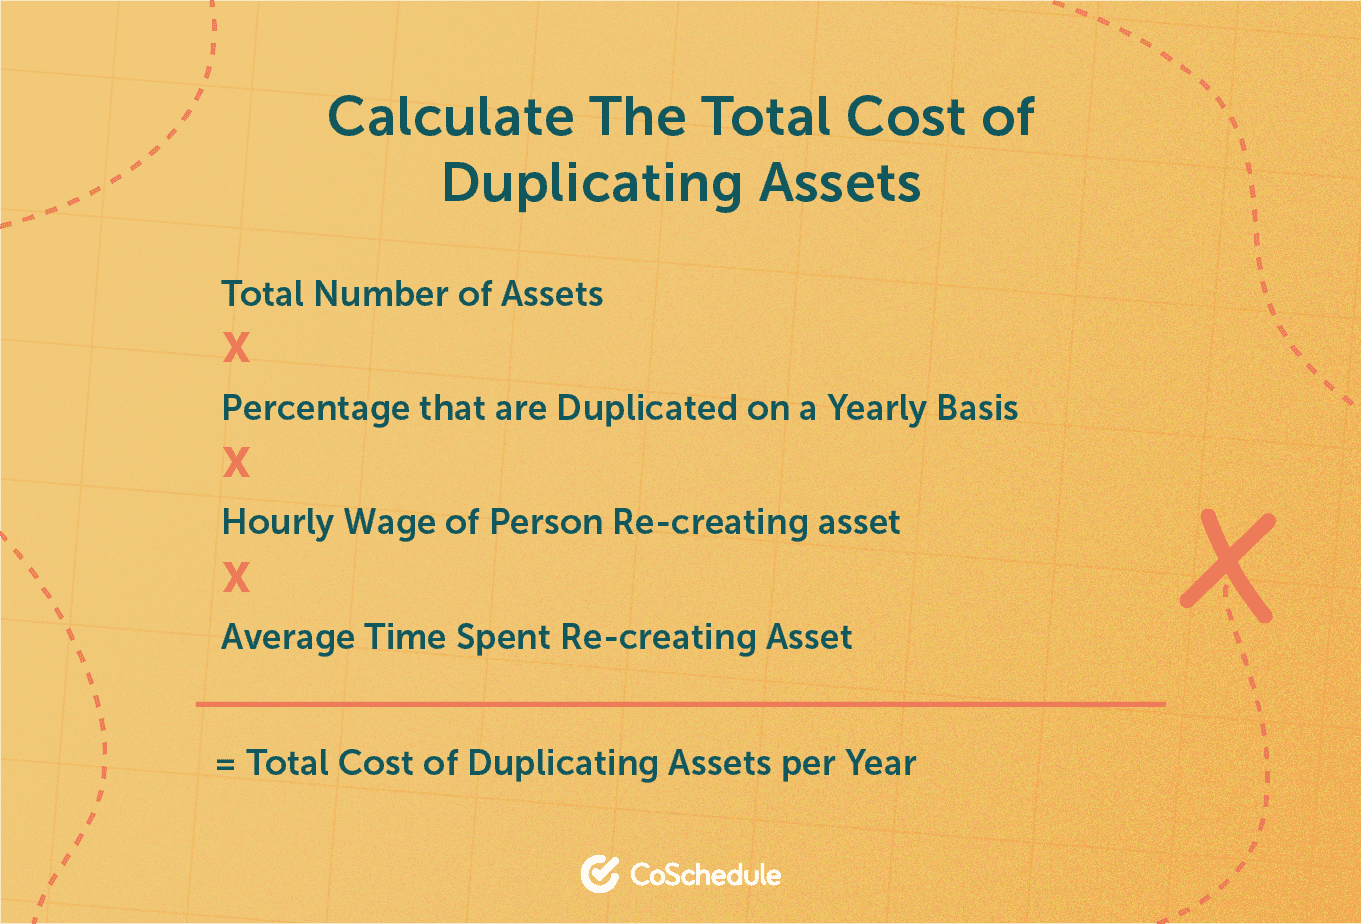 Calculate cost of duplicating assets.